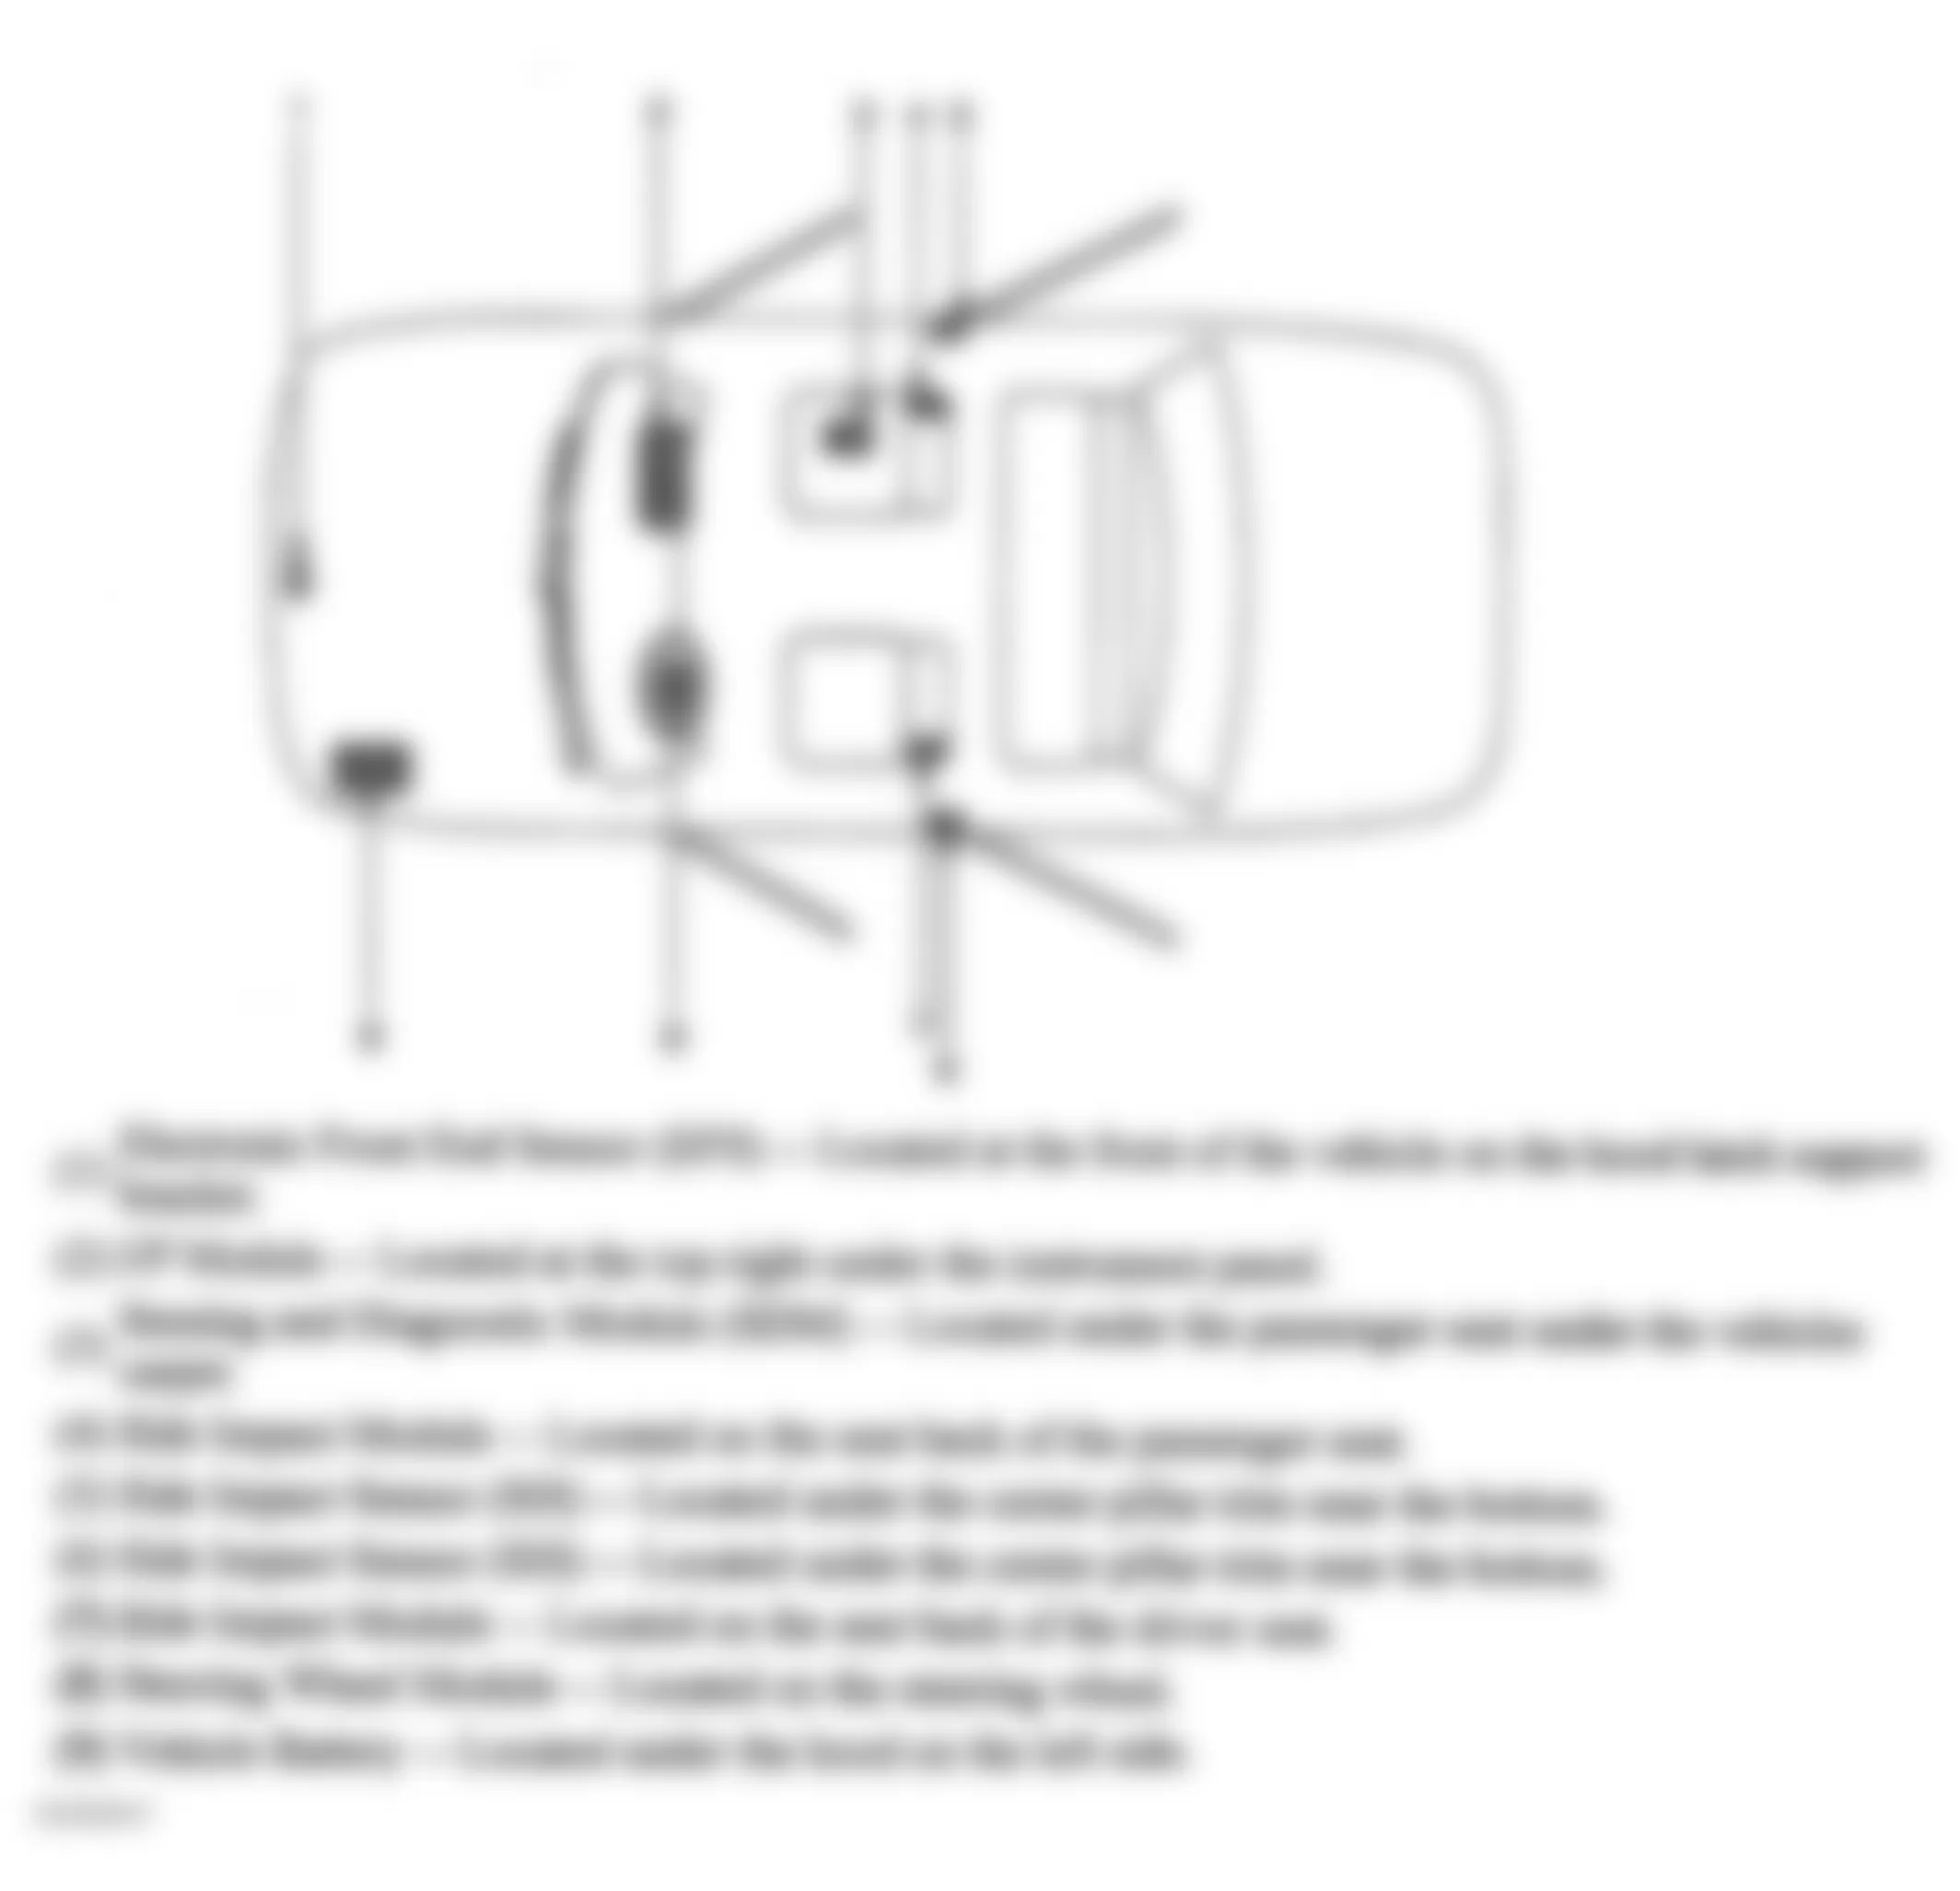 Chevrolet Cavalier 2005 - Component Locations -  Vehicle Overview Of Supplemental Inflatable Restraint Components (Sedan)